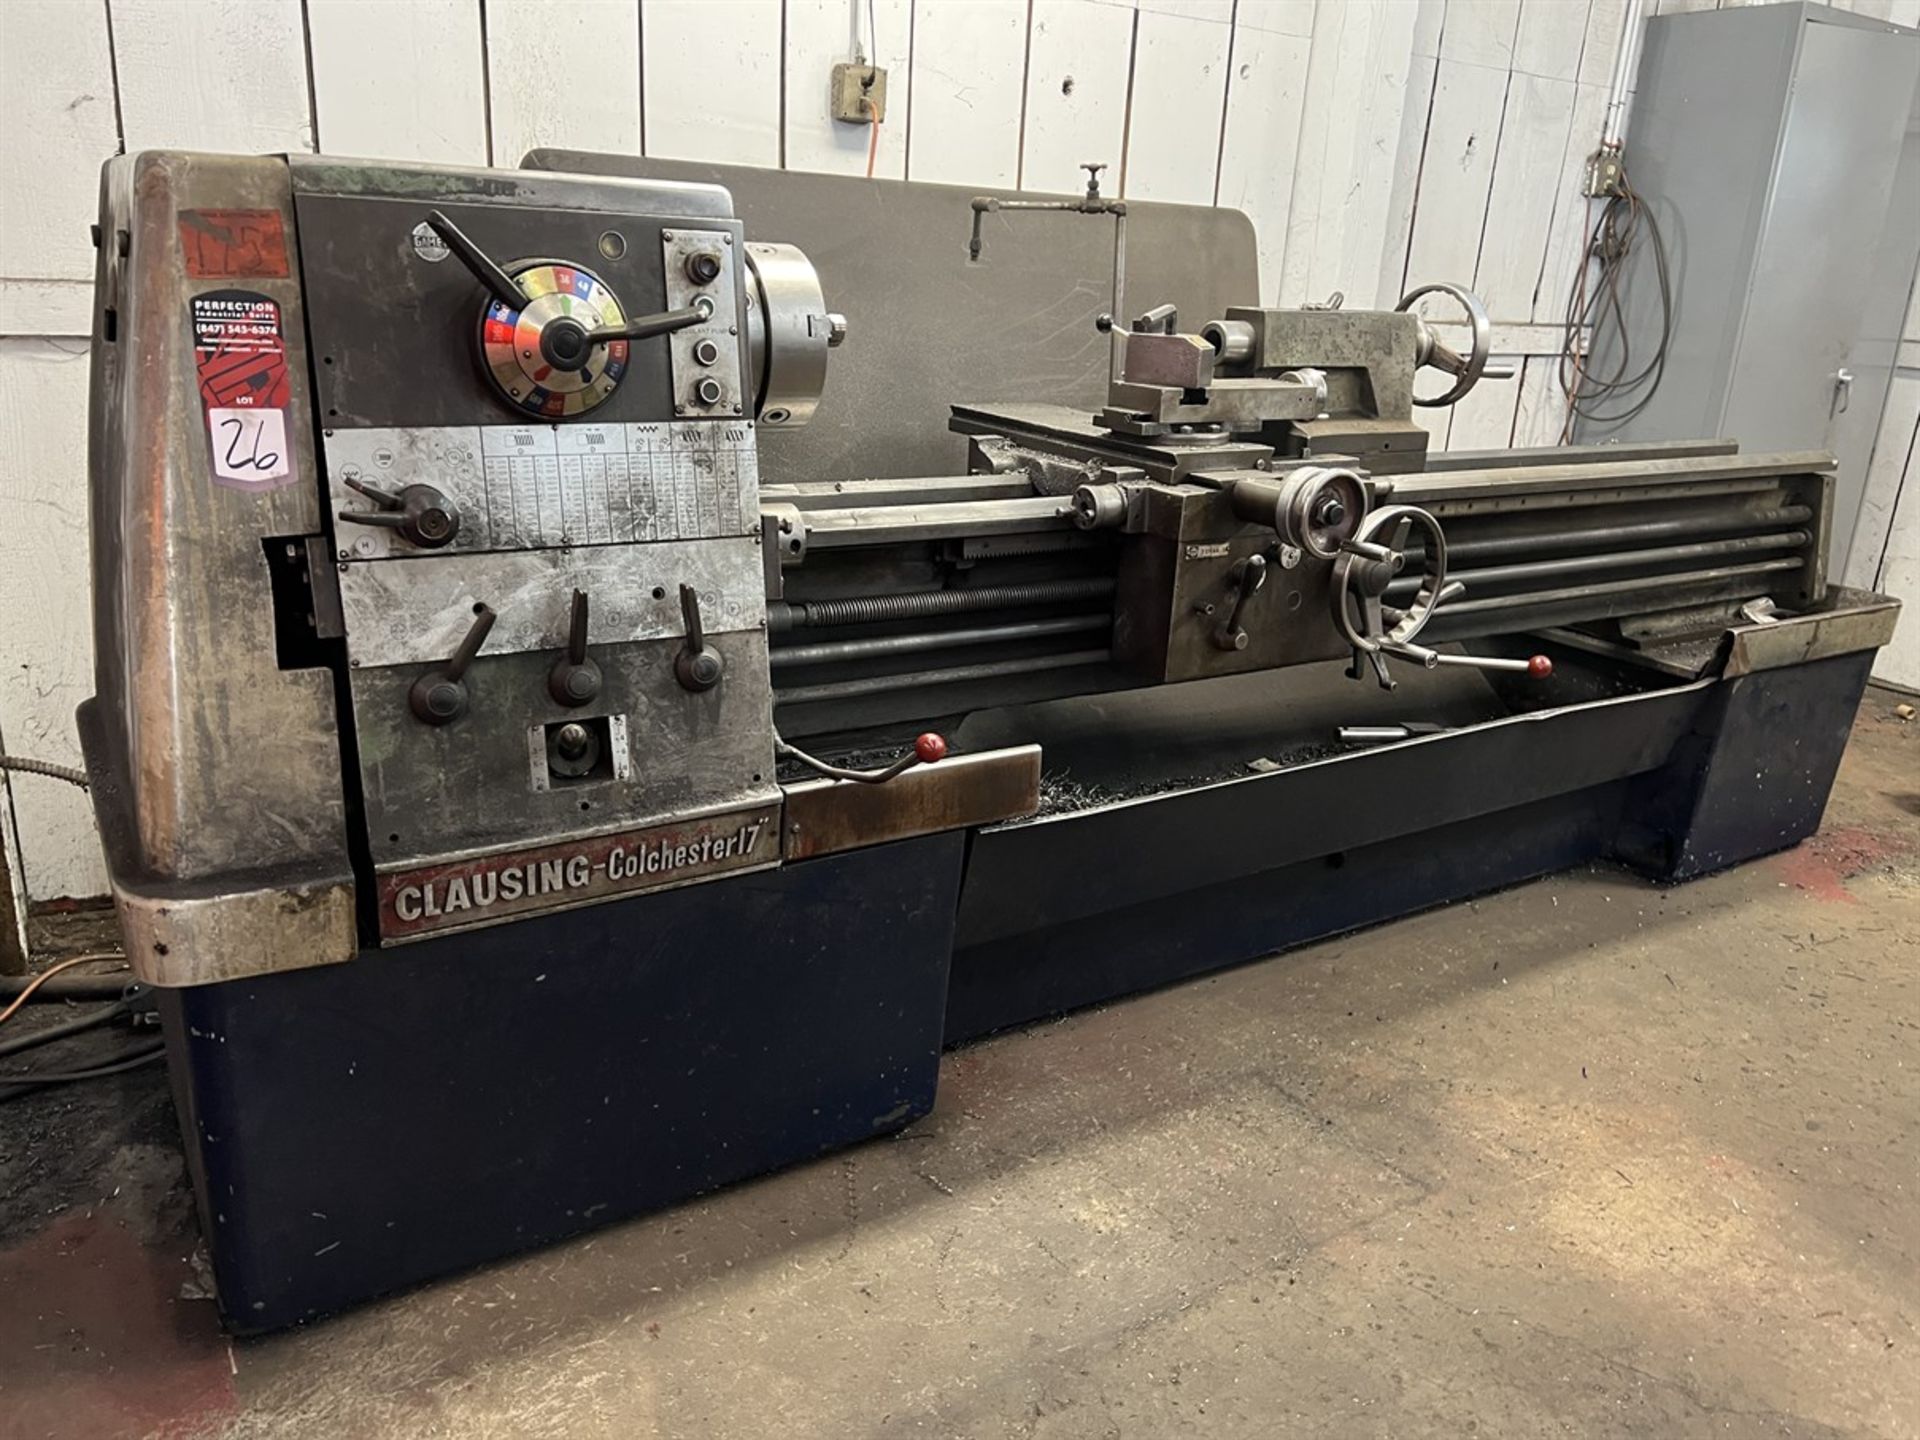 CLAUSING Colchester 17" Lathe, 17" Swing x 80" Between Centers, 10" 3-Jaw Chuck, 20-1600 RPM, Tool - Image 2 of 8